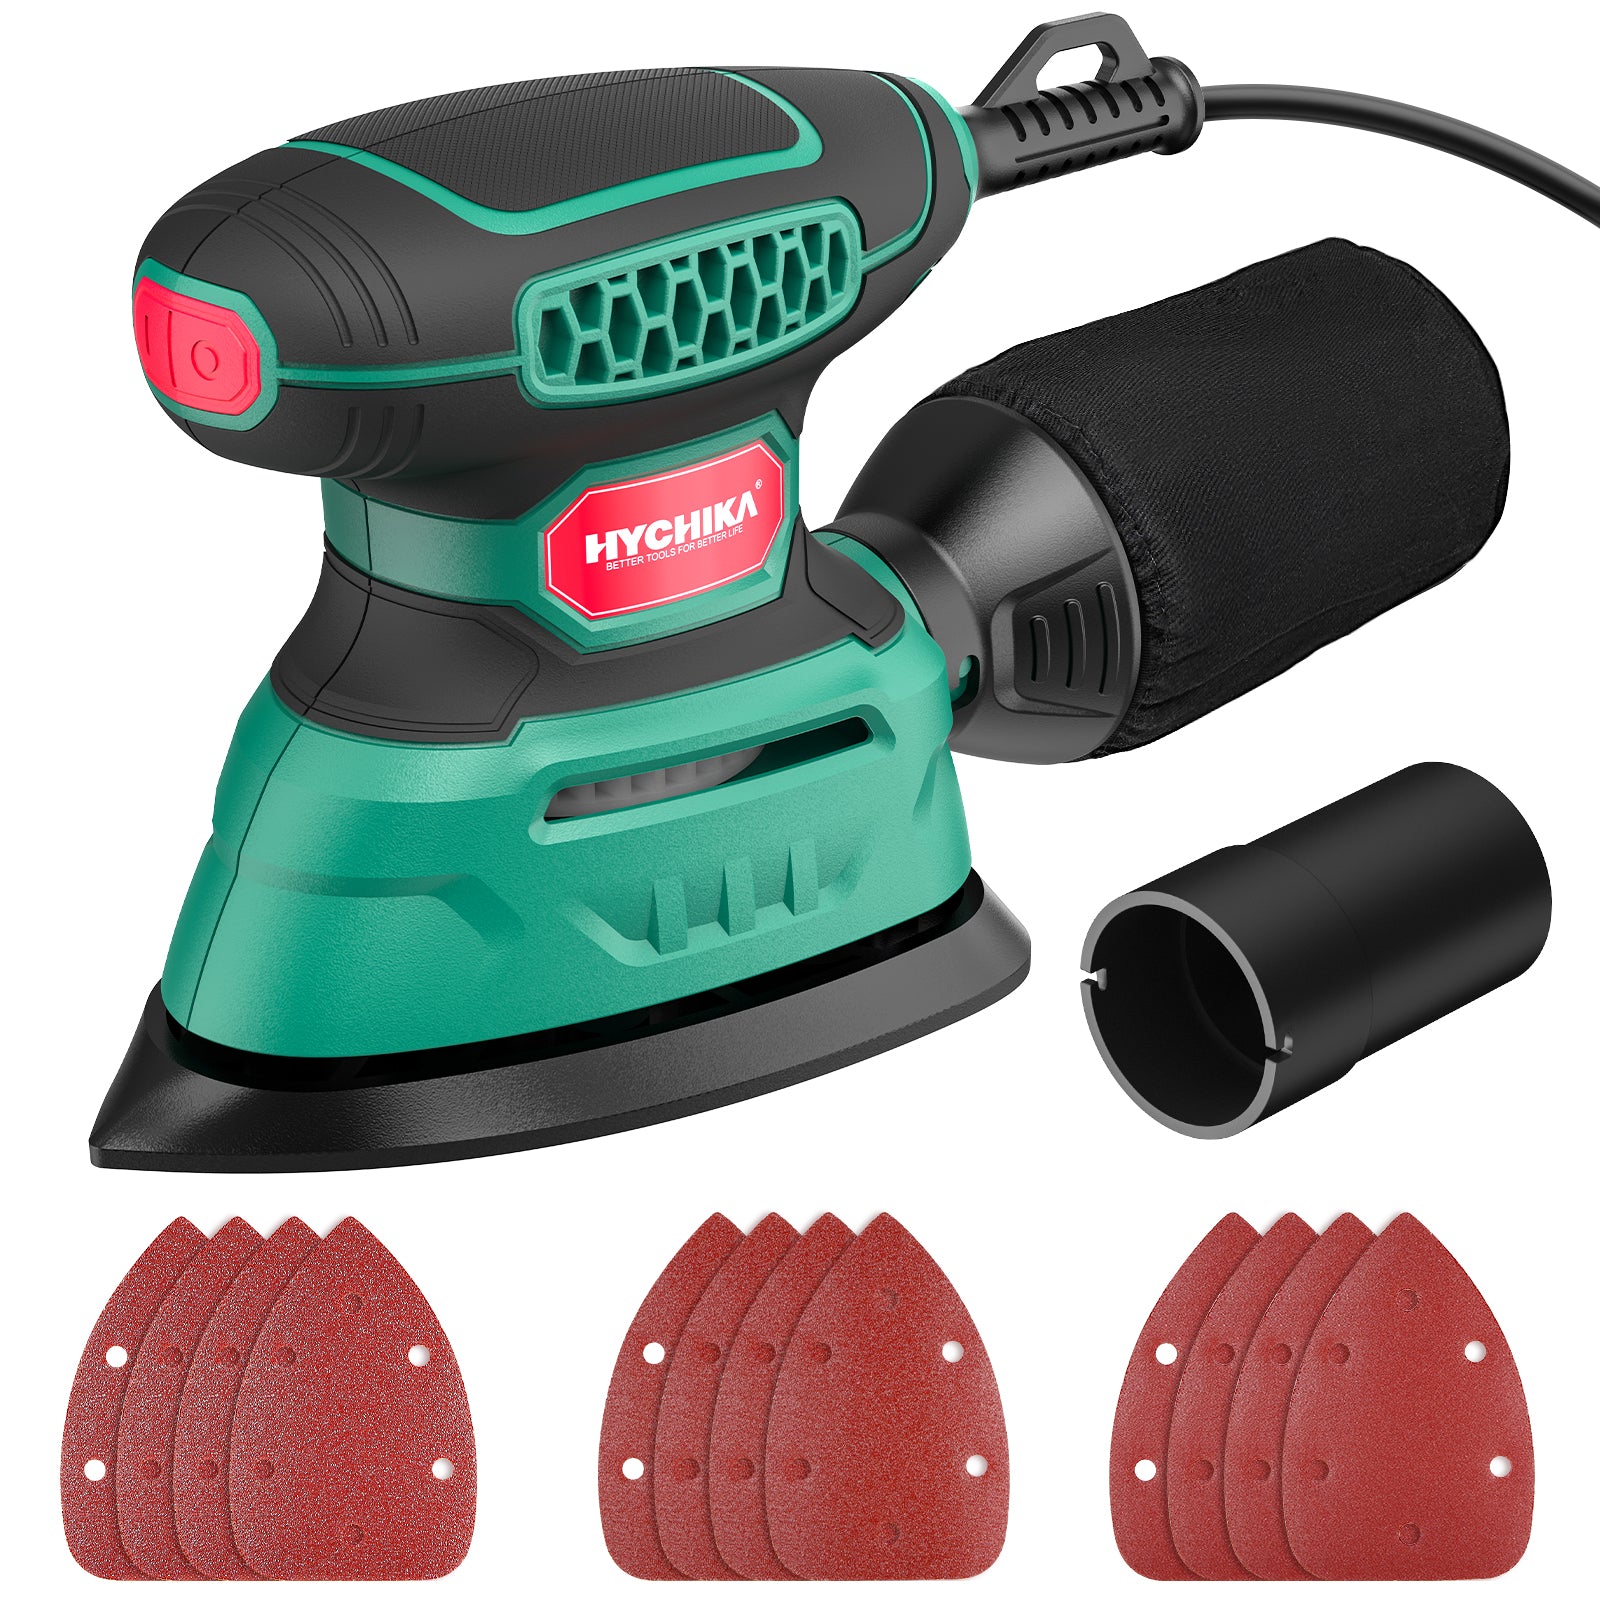 HYCHIKA 140W Detail Sander, 1.2A Palm Sander Tool with 12pcs Sandpapers (EU/US)